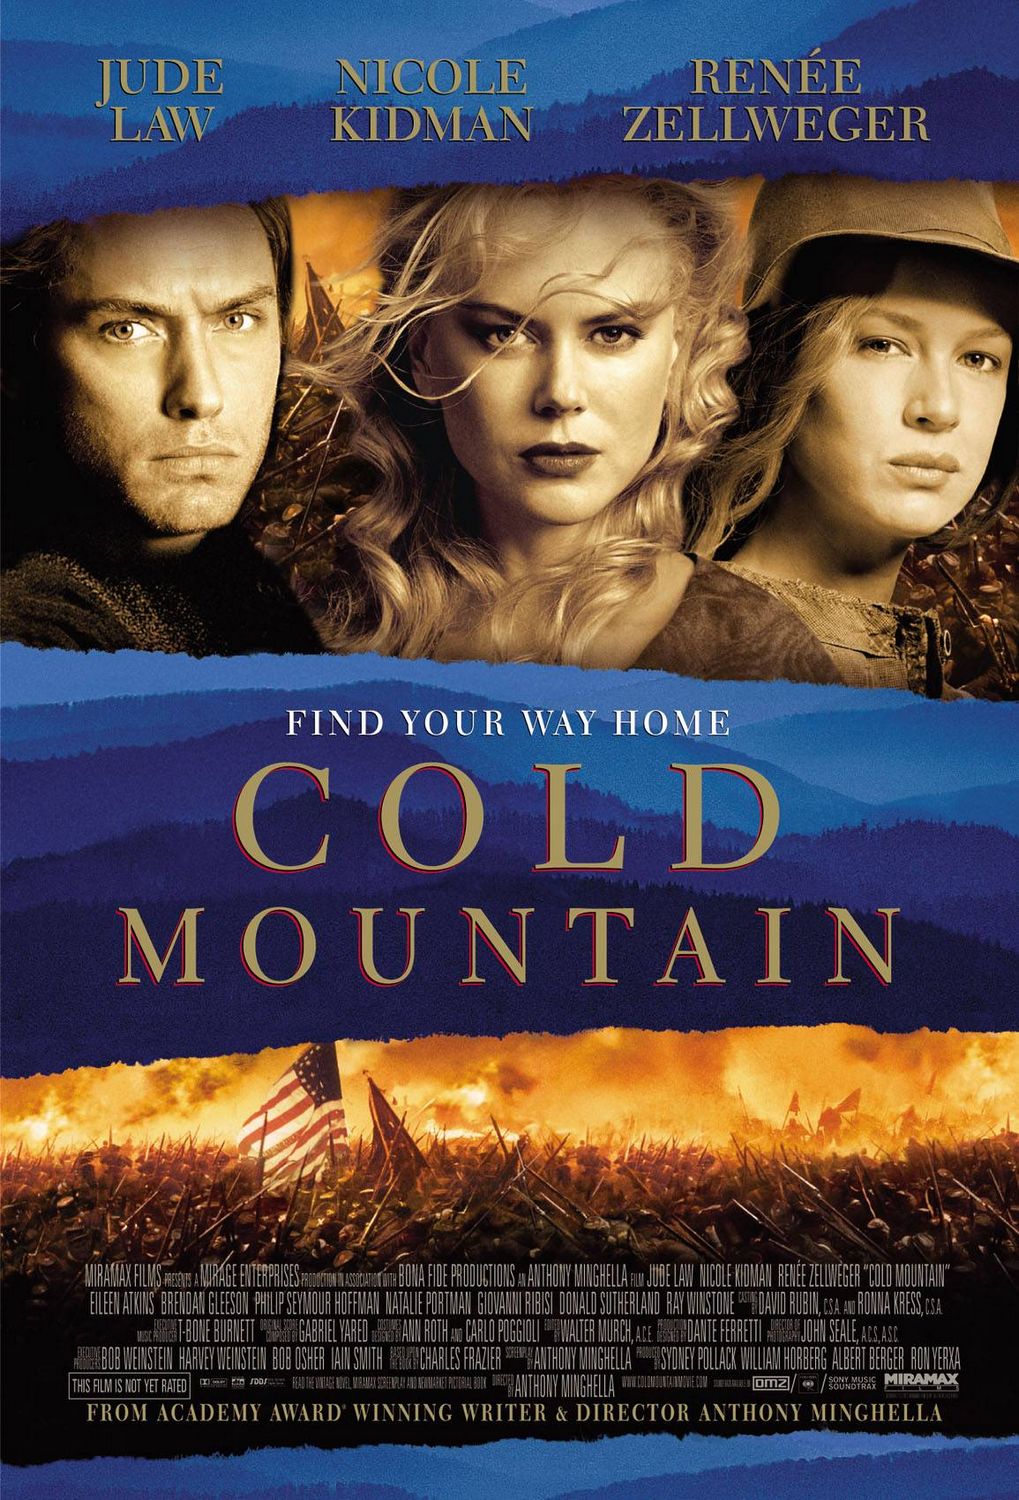 Friday Night at the Movies – Cold Mountain